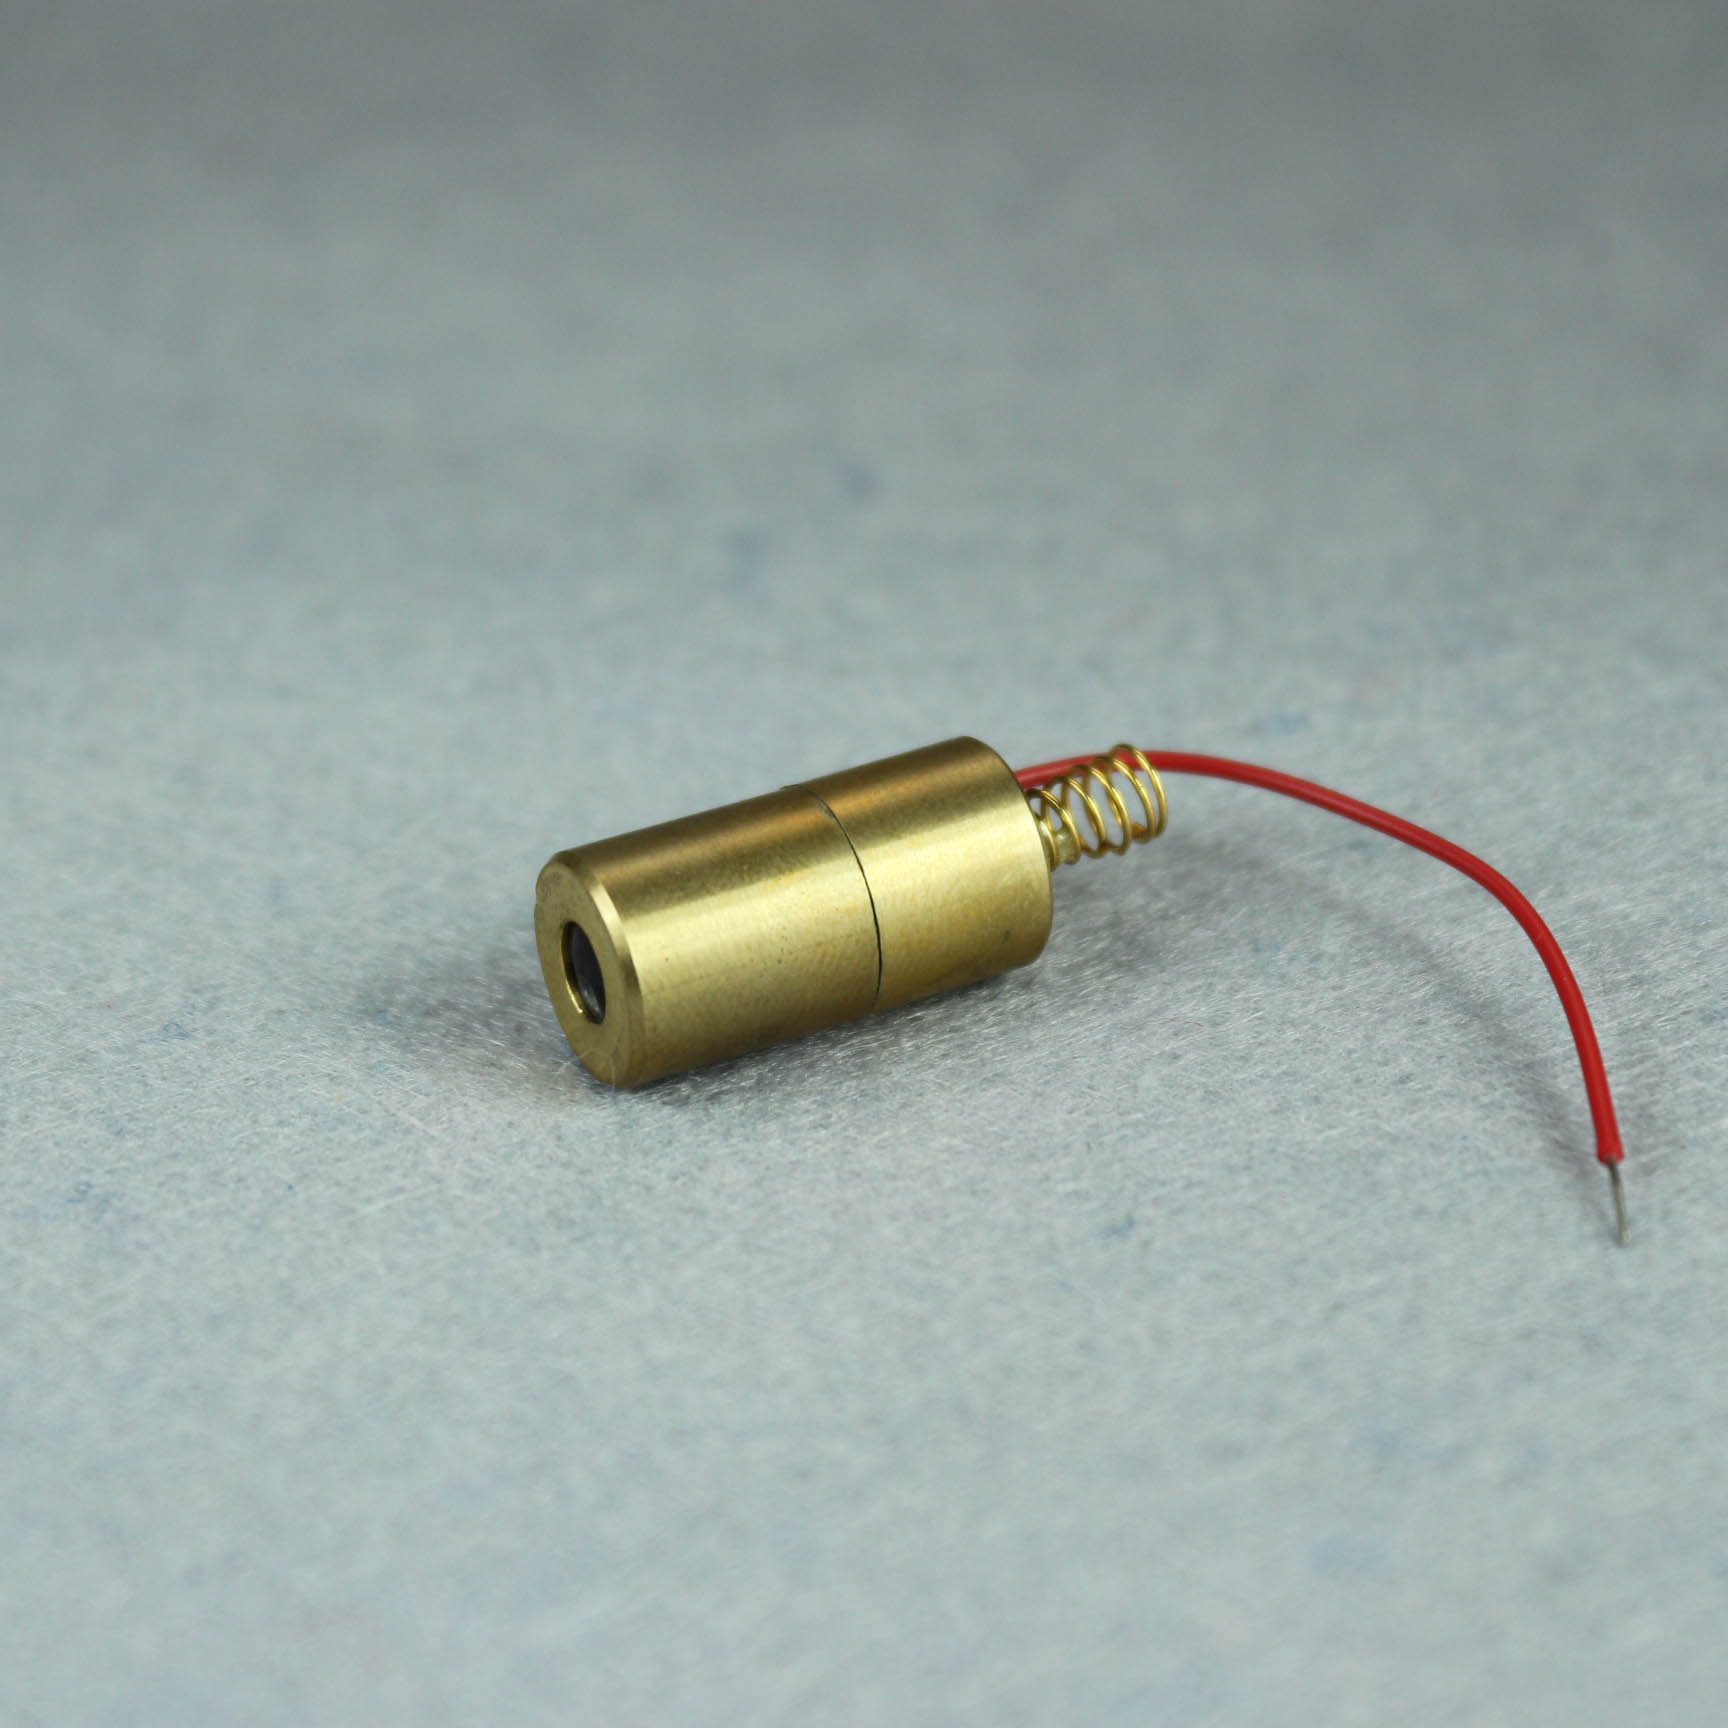 Military Laser 650nm 5mW Pulsed Laser Diode Module with PD Feedback and Spring Connection